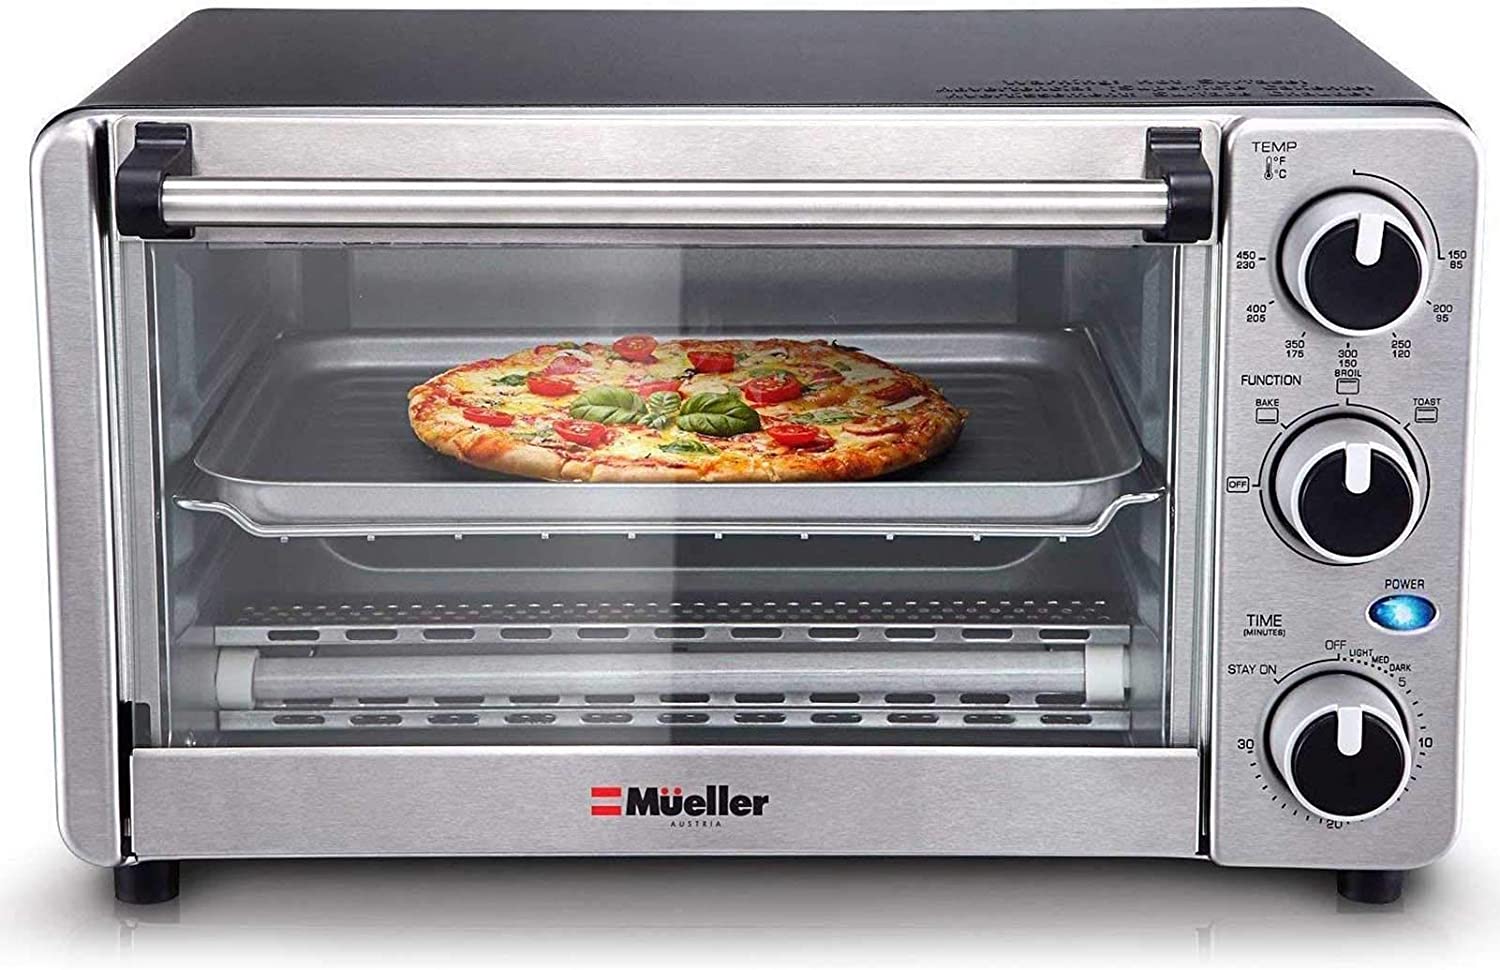 https://bigbigmart.com/wp-content/uploads/2023/06/Mueller-Austria-Toaster-Oven-4-Slice-Multi-function-Stainless-Steel-Finish-with-Timer-Toast-Bake-Broil-Settings-Natural-Convection-1100-Watts-of-Power-Includes-Baking-Pan-and-Rack.jpg